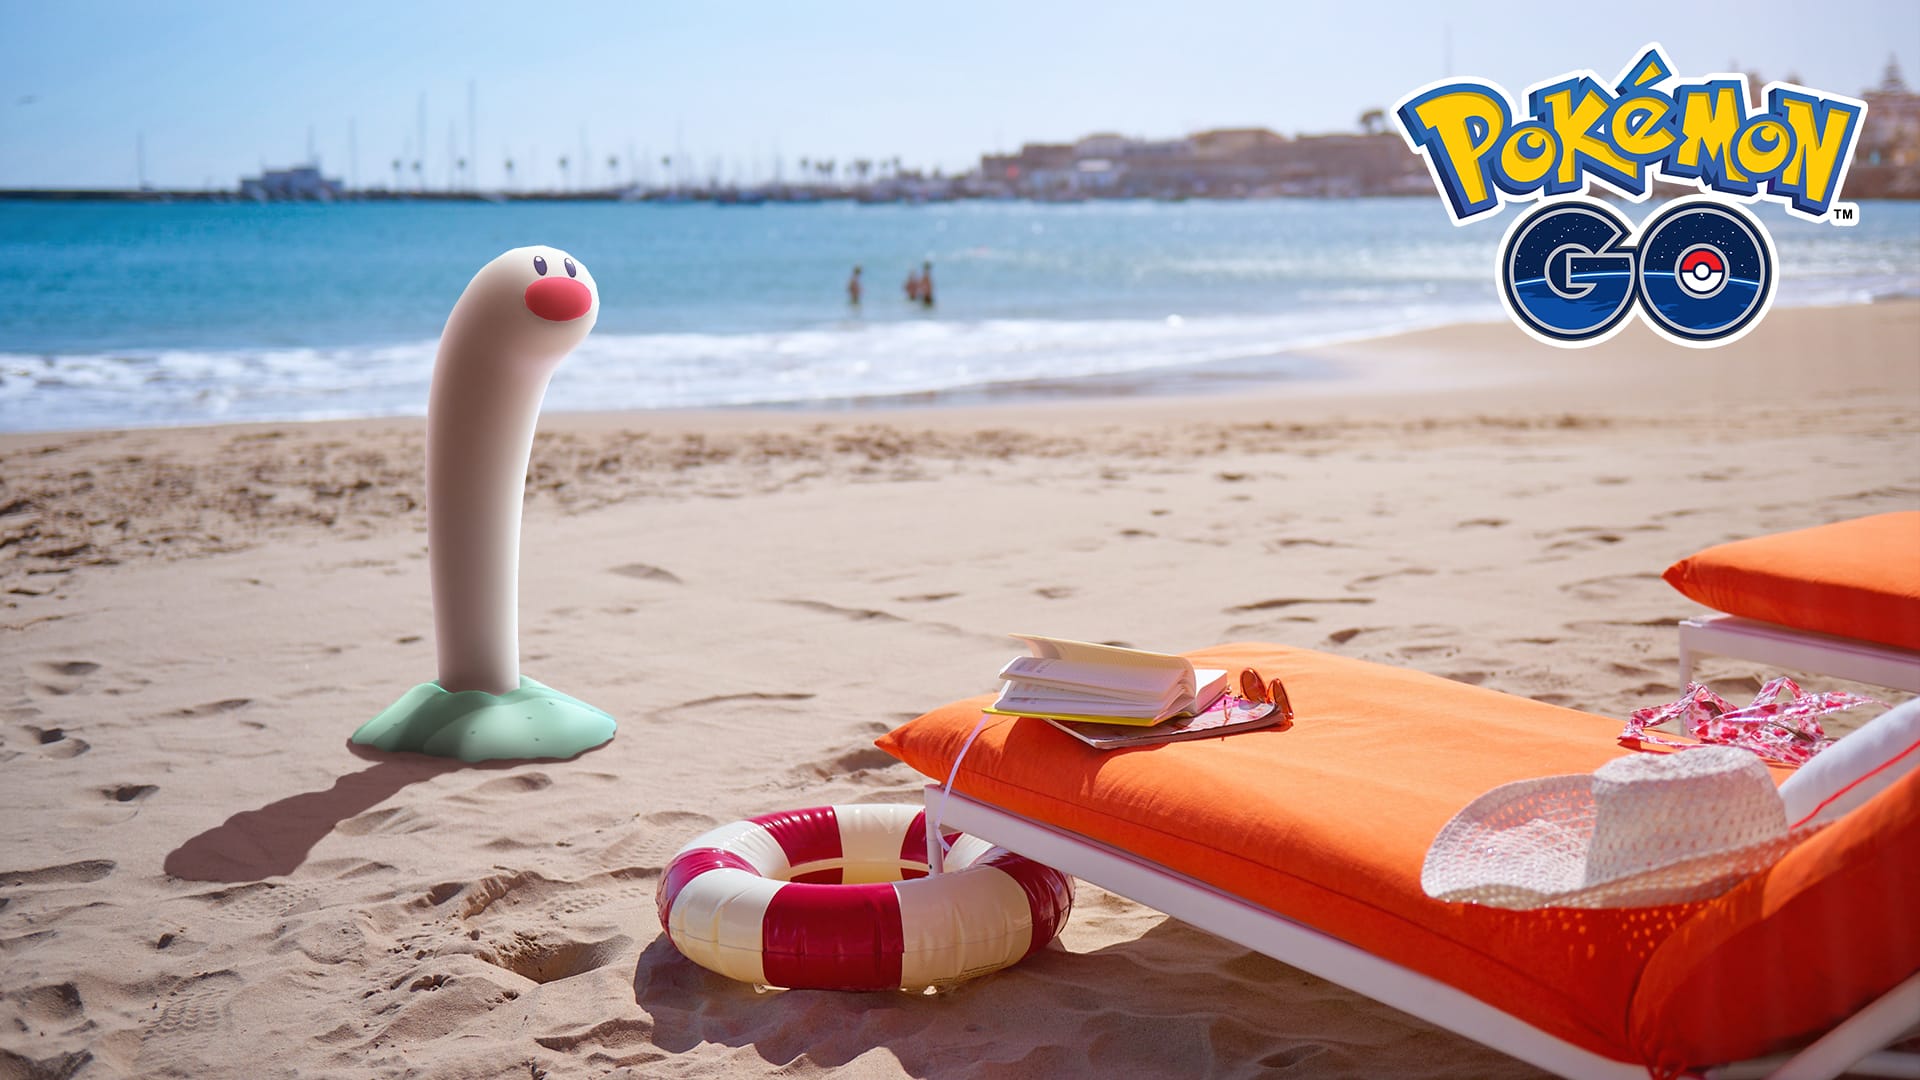 Pokémon Go Players Invent Fake Beaches on Real Maps to Catch Rare Wigletts